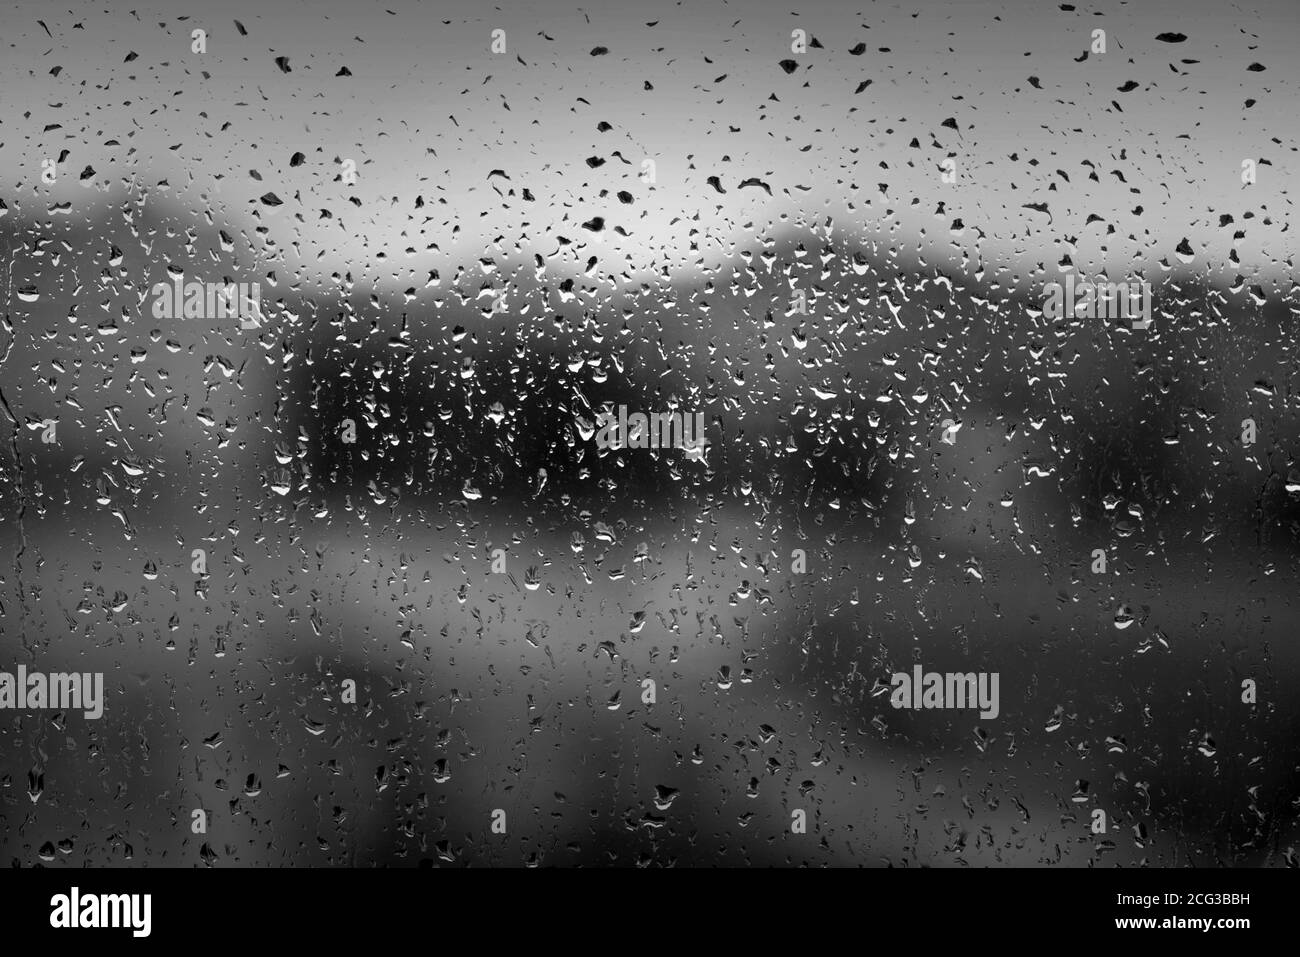 Water drops on window after heavy rain as texture or background Stock Photo